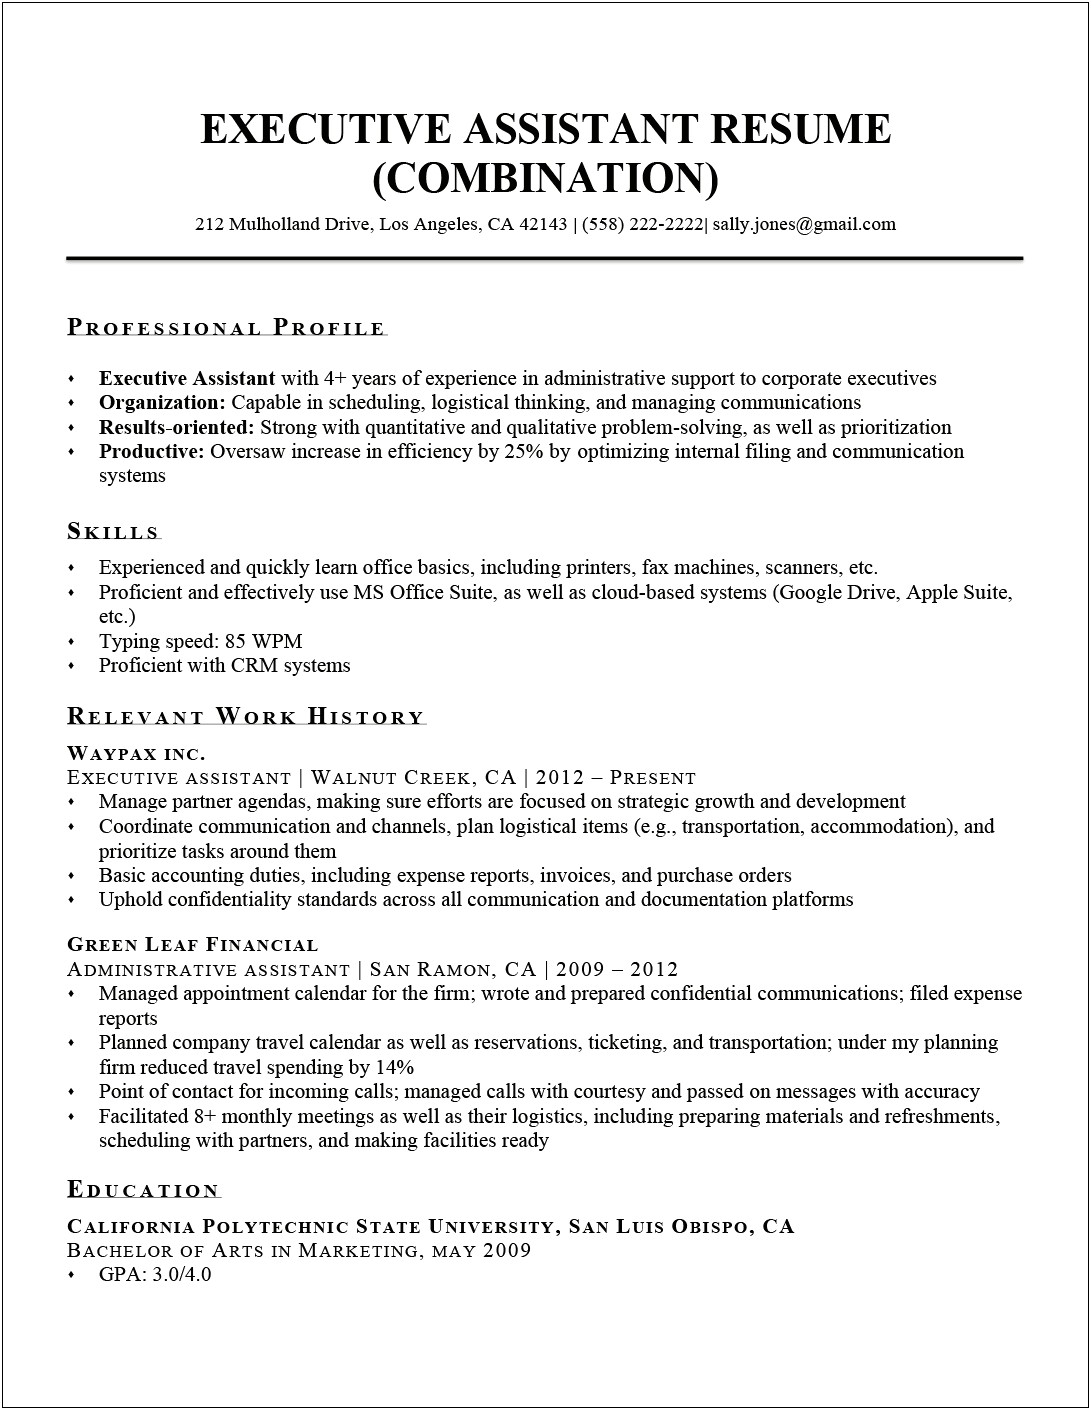 Examples Of Resume Summary For Administrative Assistant